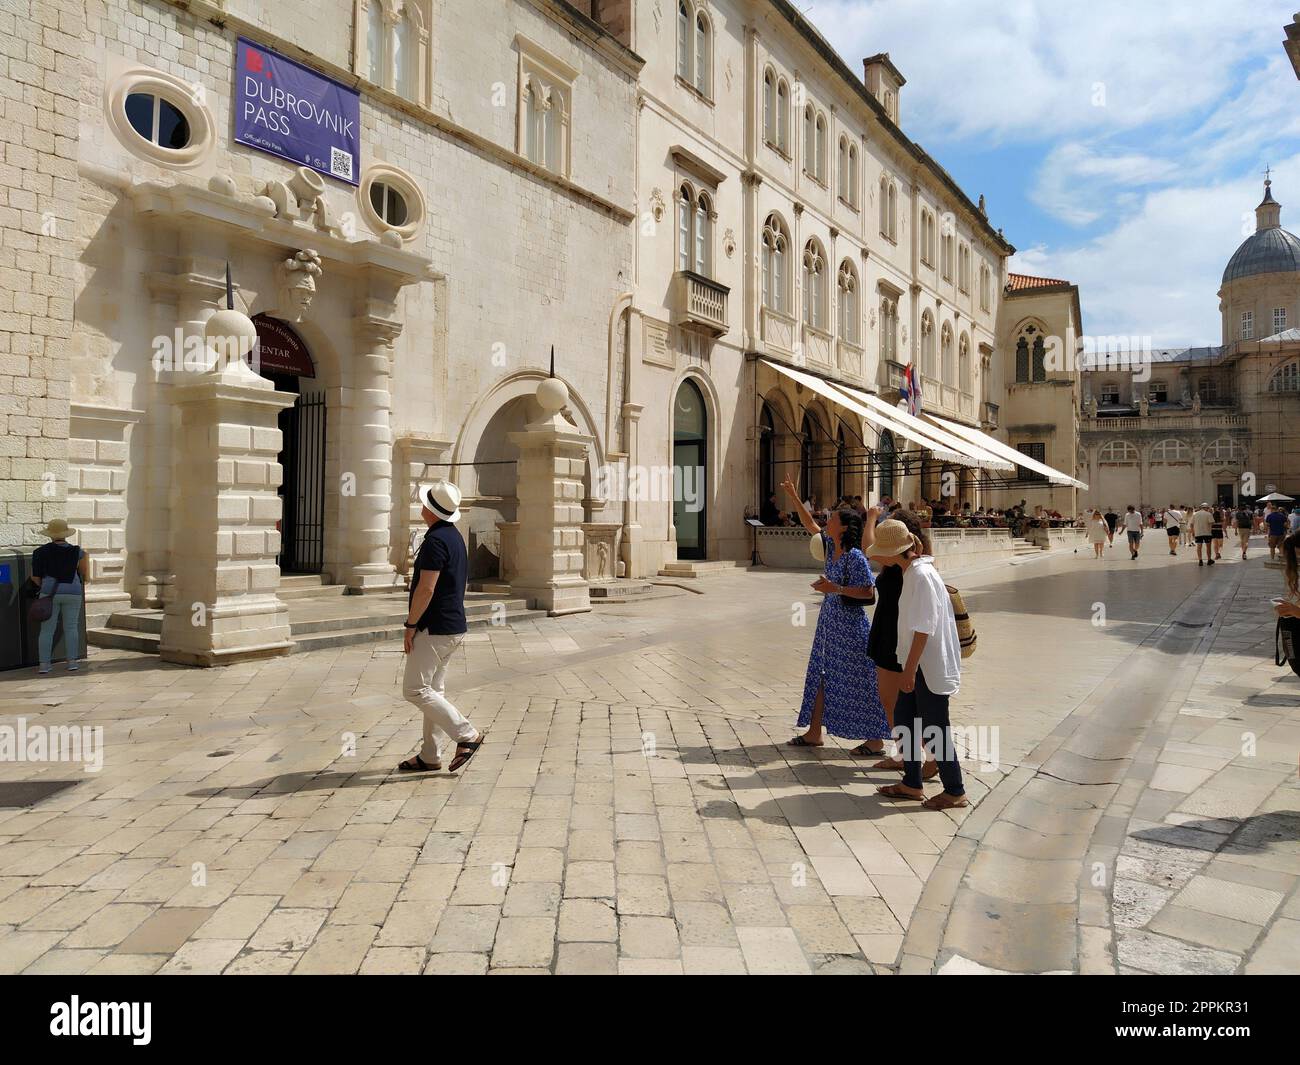 Stradun, Stradone is the main street of the historic city center of Dubrovnik in Croatia. Architectural sights. A popular place for tourist walks. People are walking 08.14.2022 tourism travel business Stock Photo